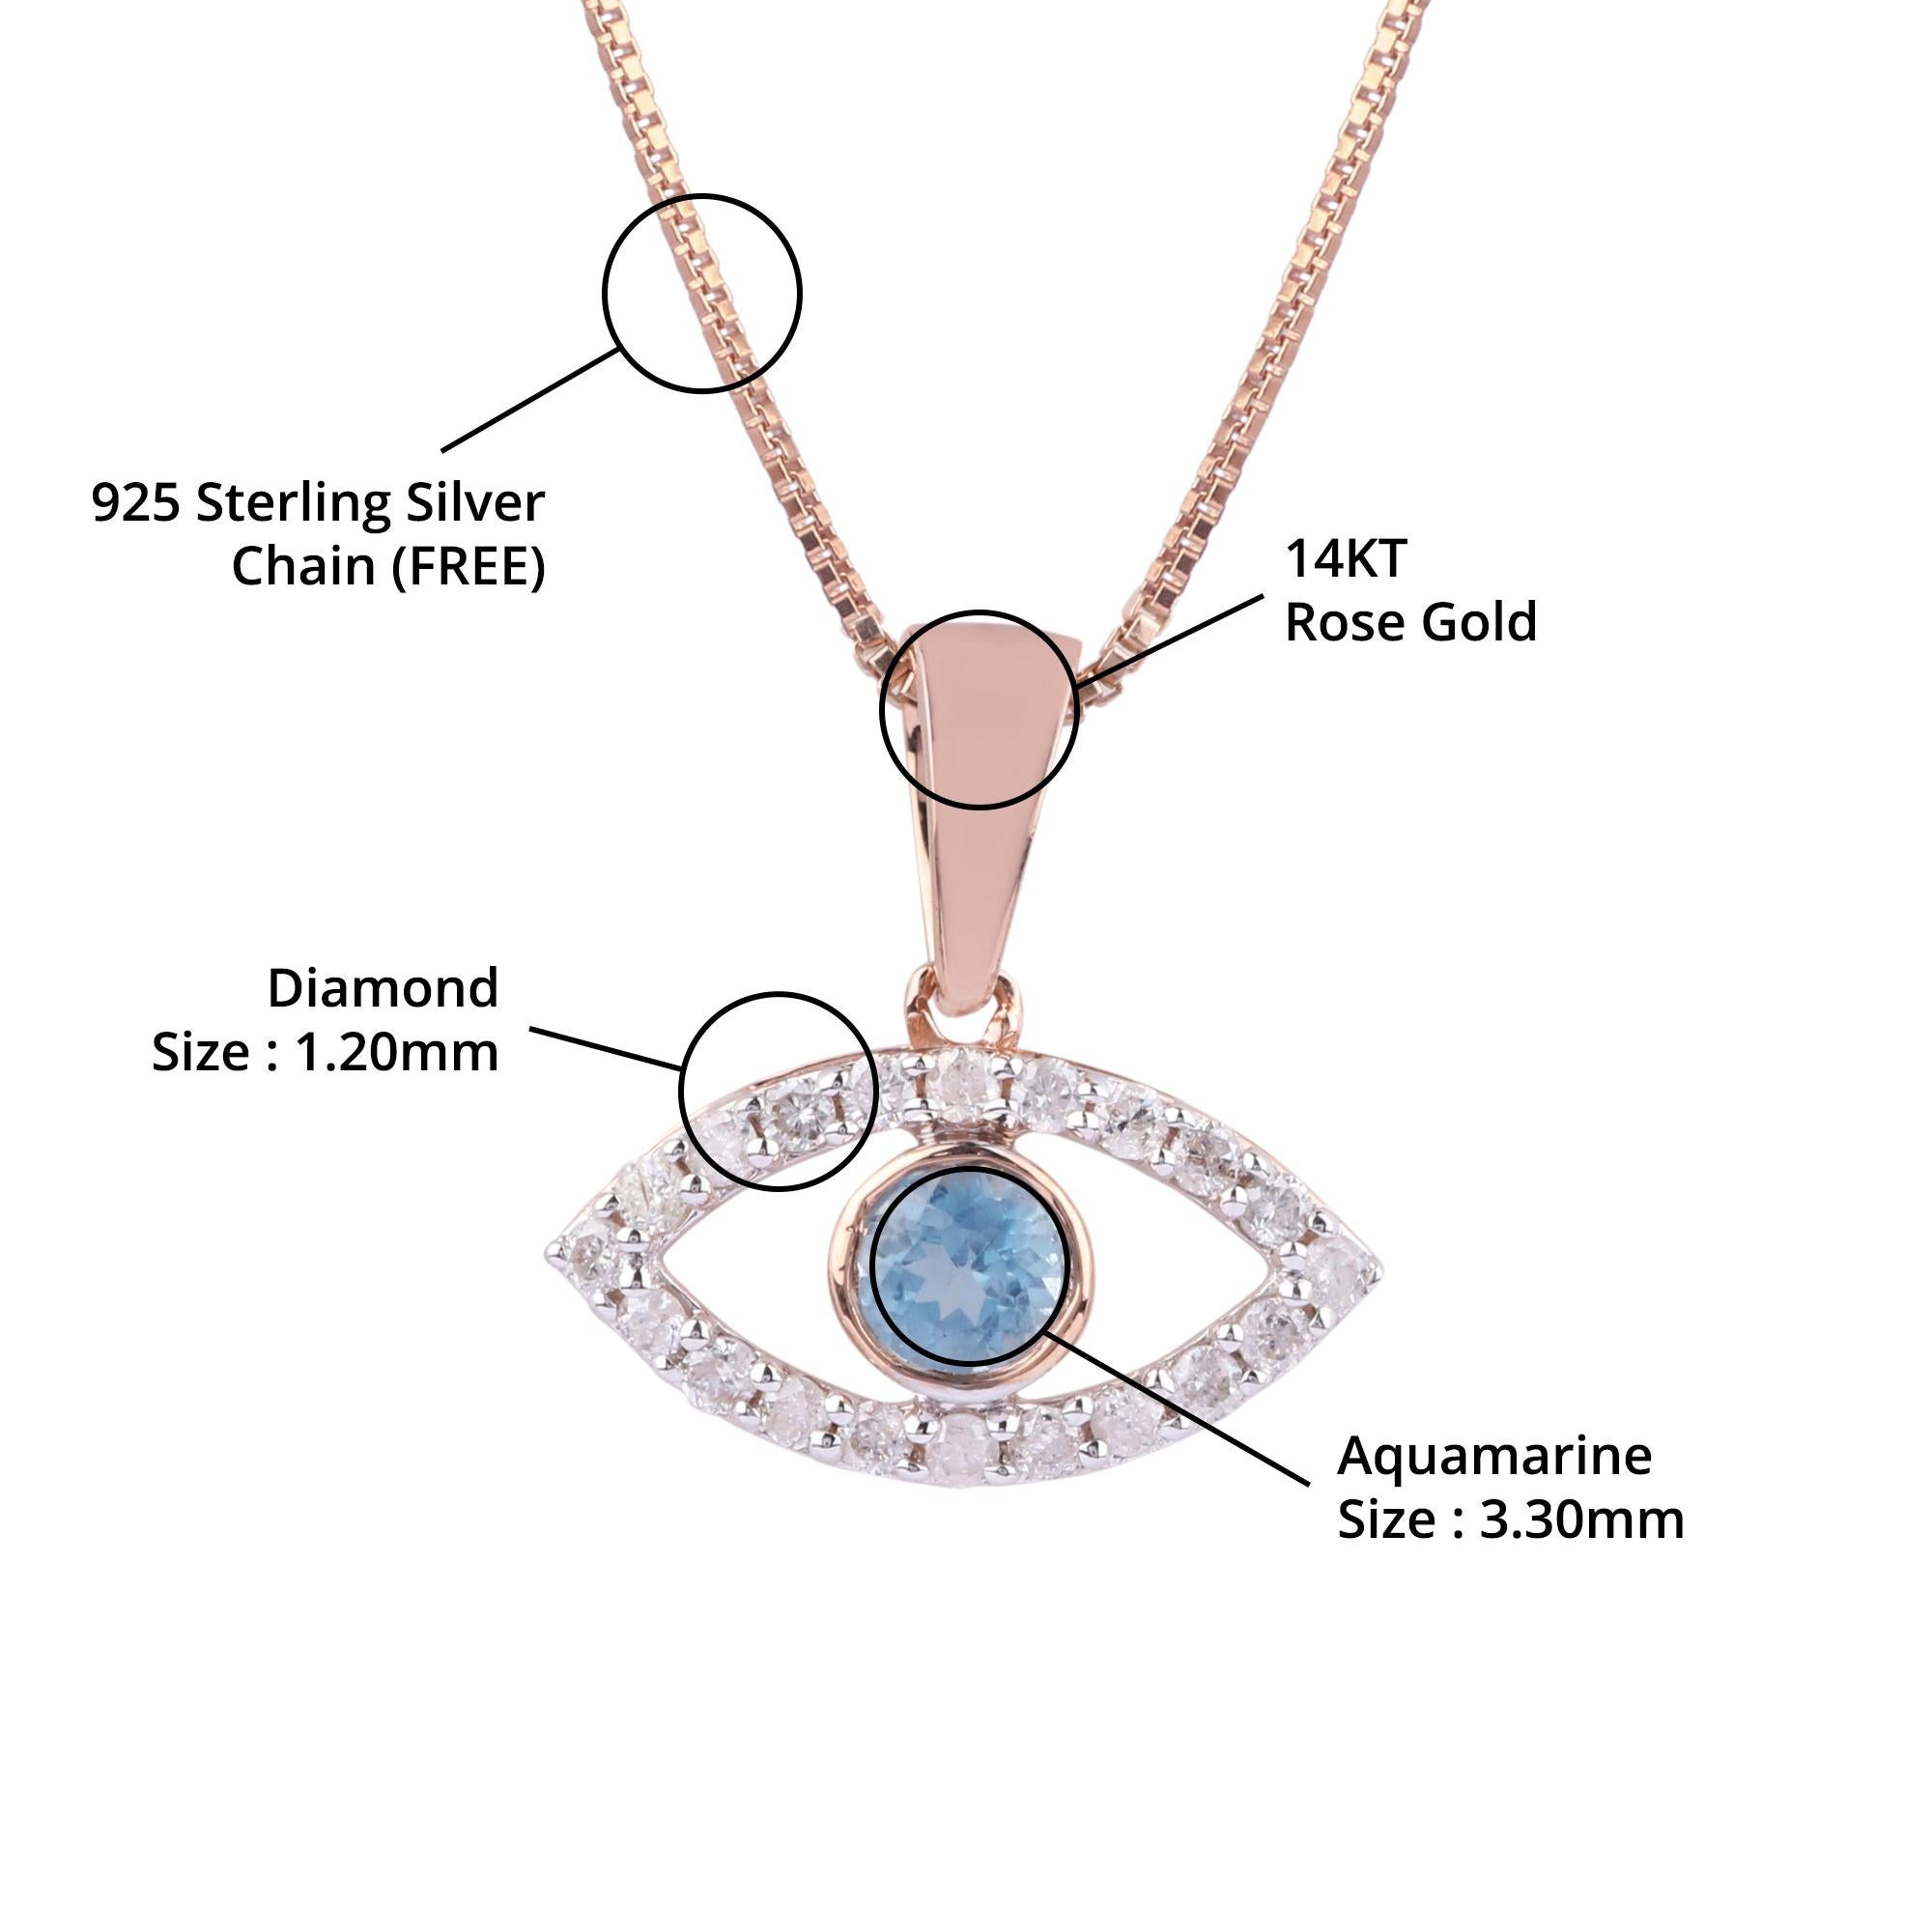 Item details:-

✦ SKU:- JPD00185RRR

✦ Material :- Gold

✦ Metal Purity : 14K Rose Gold

✦ Gemstone Specification:- 
✧ Clear Diamond Round (l1/H1) - 1.20 mm - 20 Pcs
✧ Clear AQUAMARINE Round - 3.30 mm - 1 Pc


✦ Approx. Clear Diamond Weight : 0.170